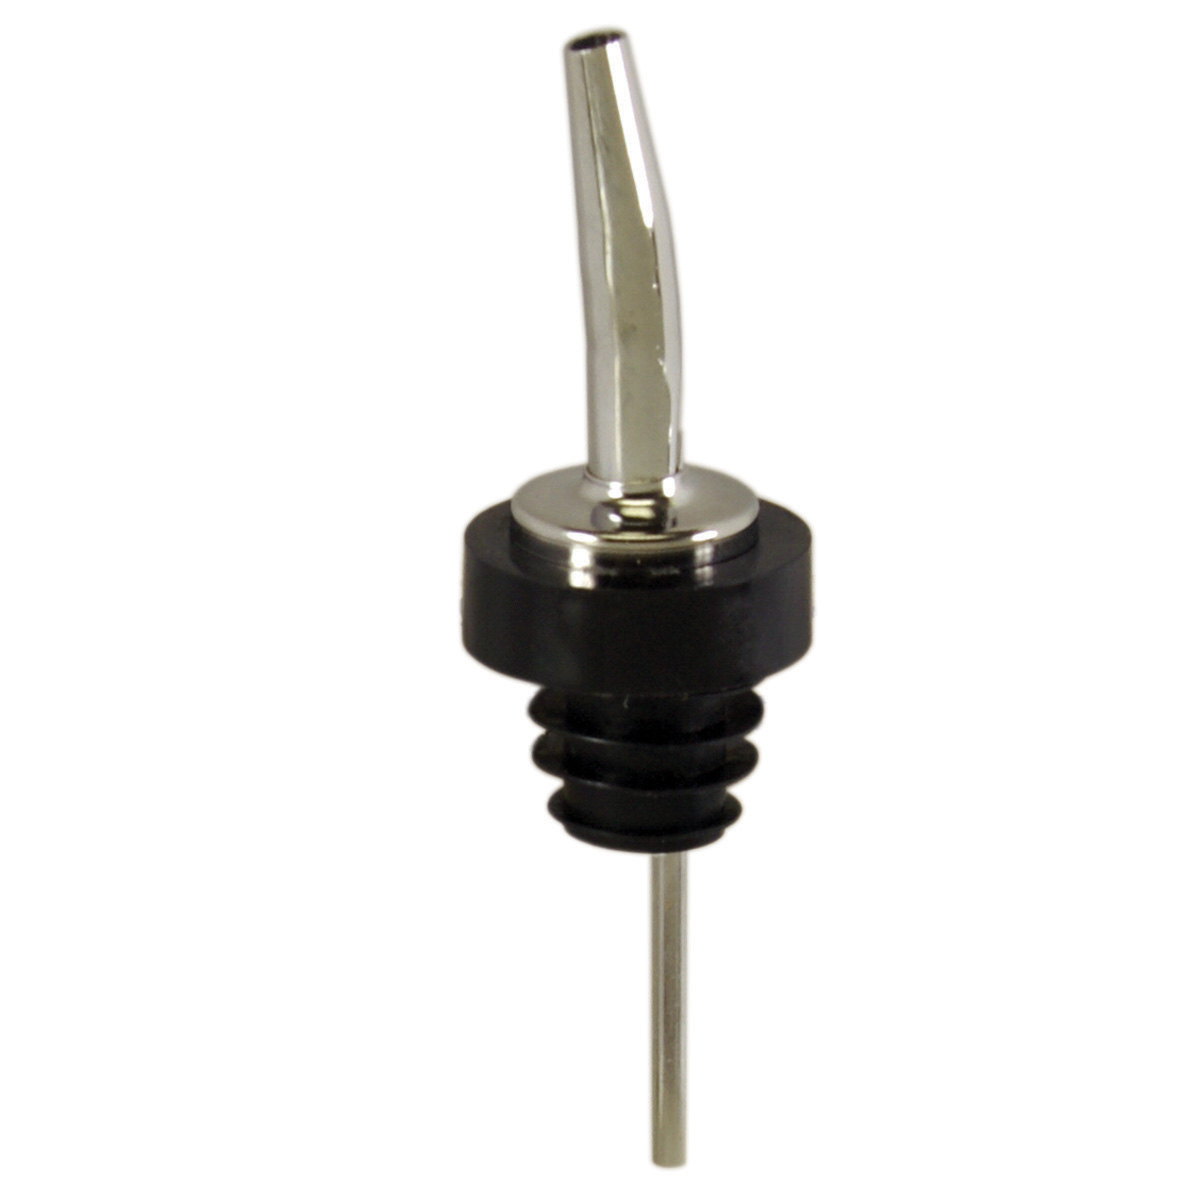 Spill-Stop 285-51 Tapered Pourer, seamless spout, with poly-kork and black collar, controlled medium speed, chrome, Made in USA